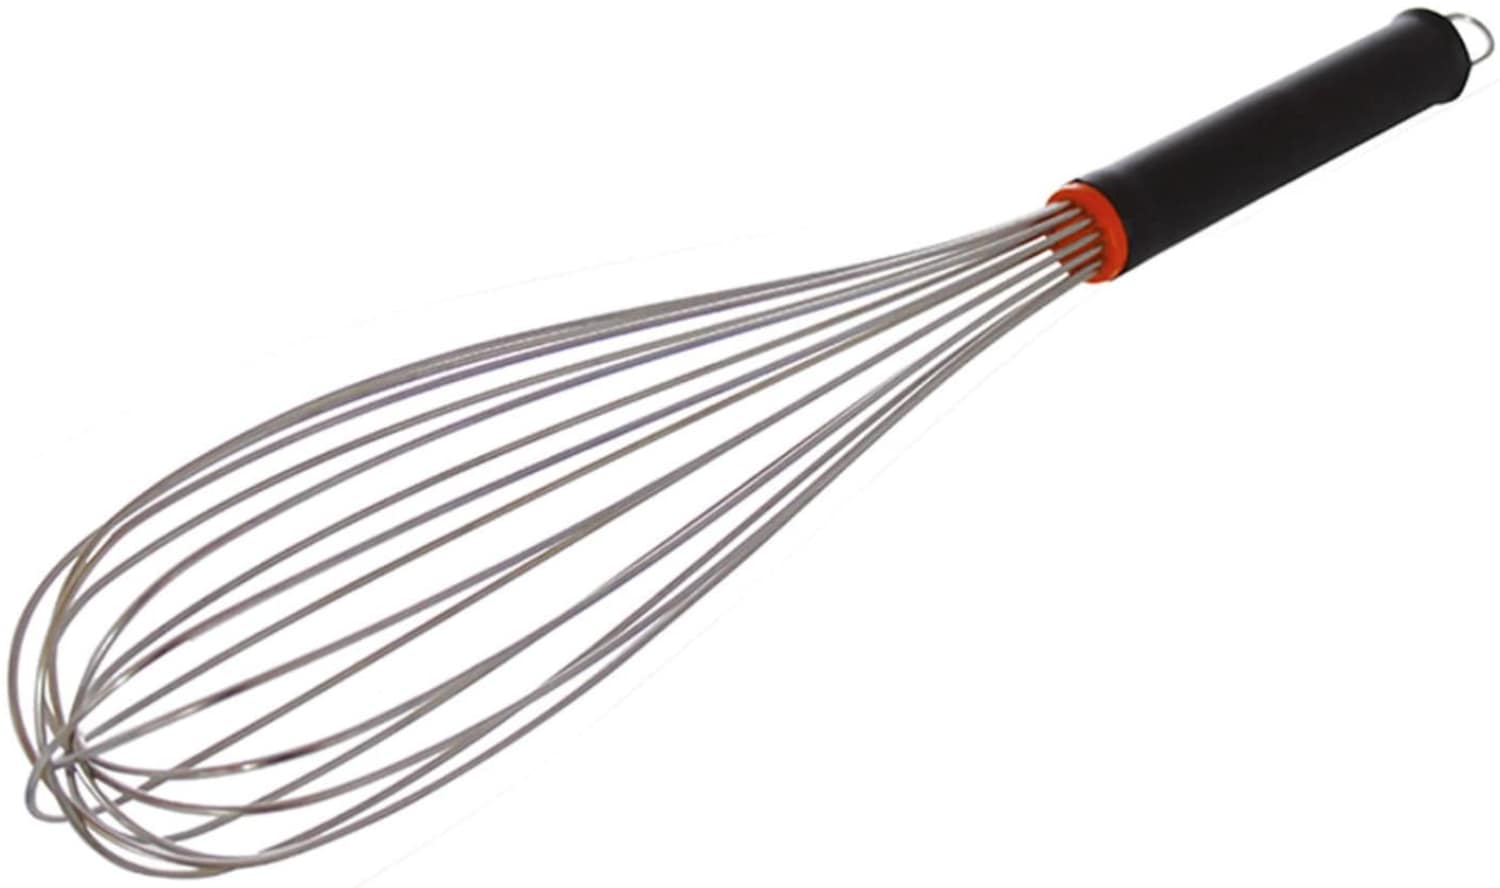 Whisk thermoplastic handle